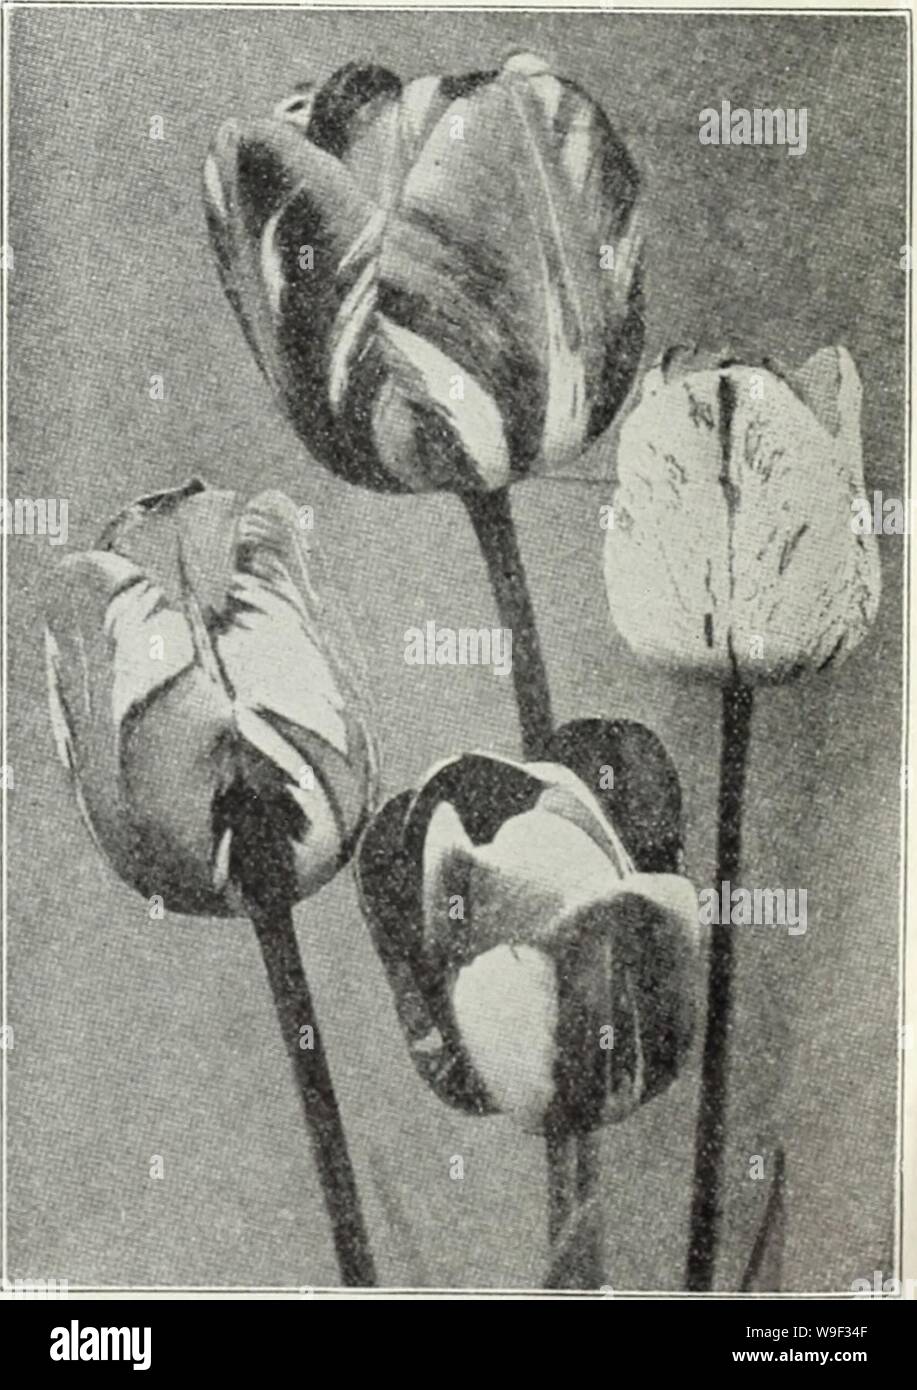 Archive image from page 12 of Currie's bulbs and plants . Currie's bulbs and plants : autumn 1928  curriesbulbsplan19curr Year: 1928 ( Old Dutch Breeder Tulips Similar to the Damvin Tulips except in the combinations of color, which is entirely different, comprising brown and orange, purple and bronze, terra cotta, grey and lilac and other artistic colors. The flowers are large and are borne on tall strong stems. Doz. 100 1000 Apricot (Perfection) — (25) Large, bronze shaded apricot, olive base $i.lO $ 7.50 $70.00 UneohiiK — (30) Very handsome dark violet, im- mense flower or stiff stem i.no lO Stock Photo